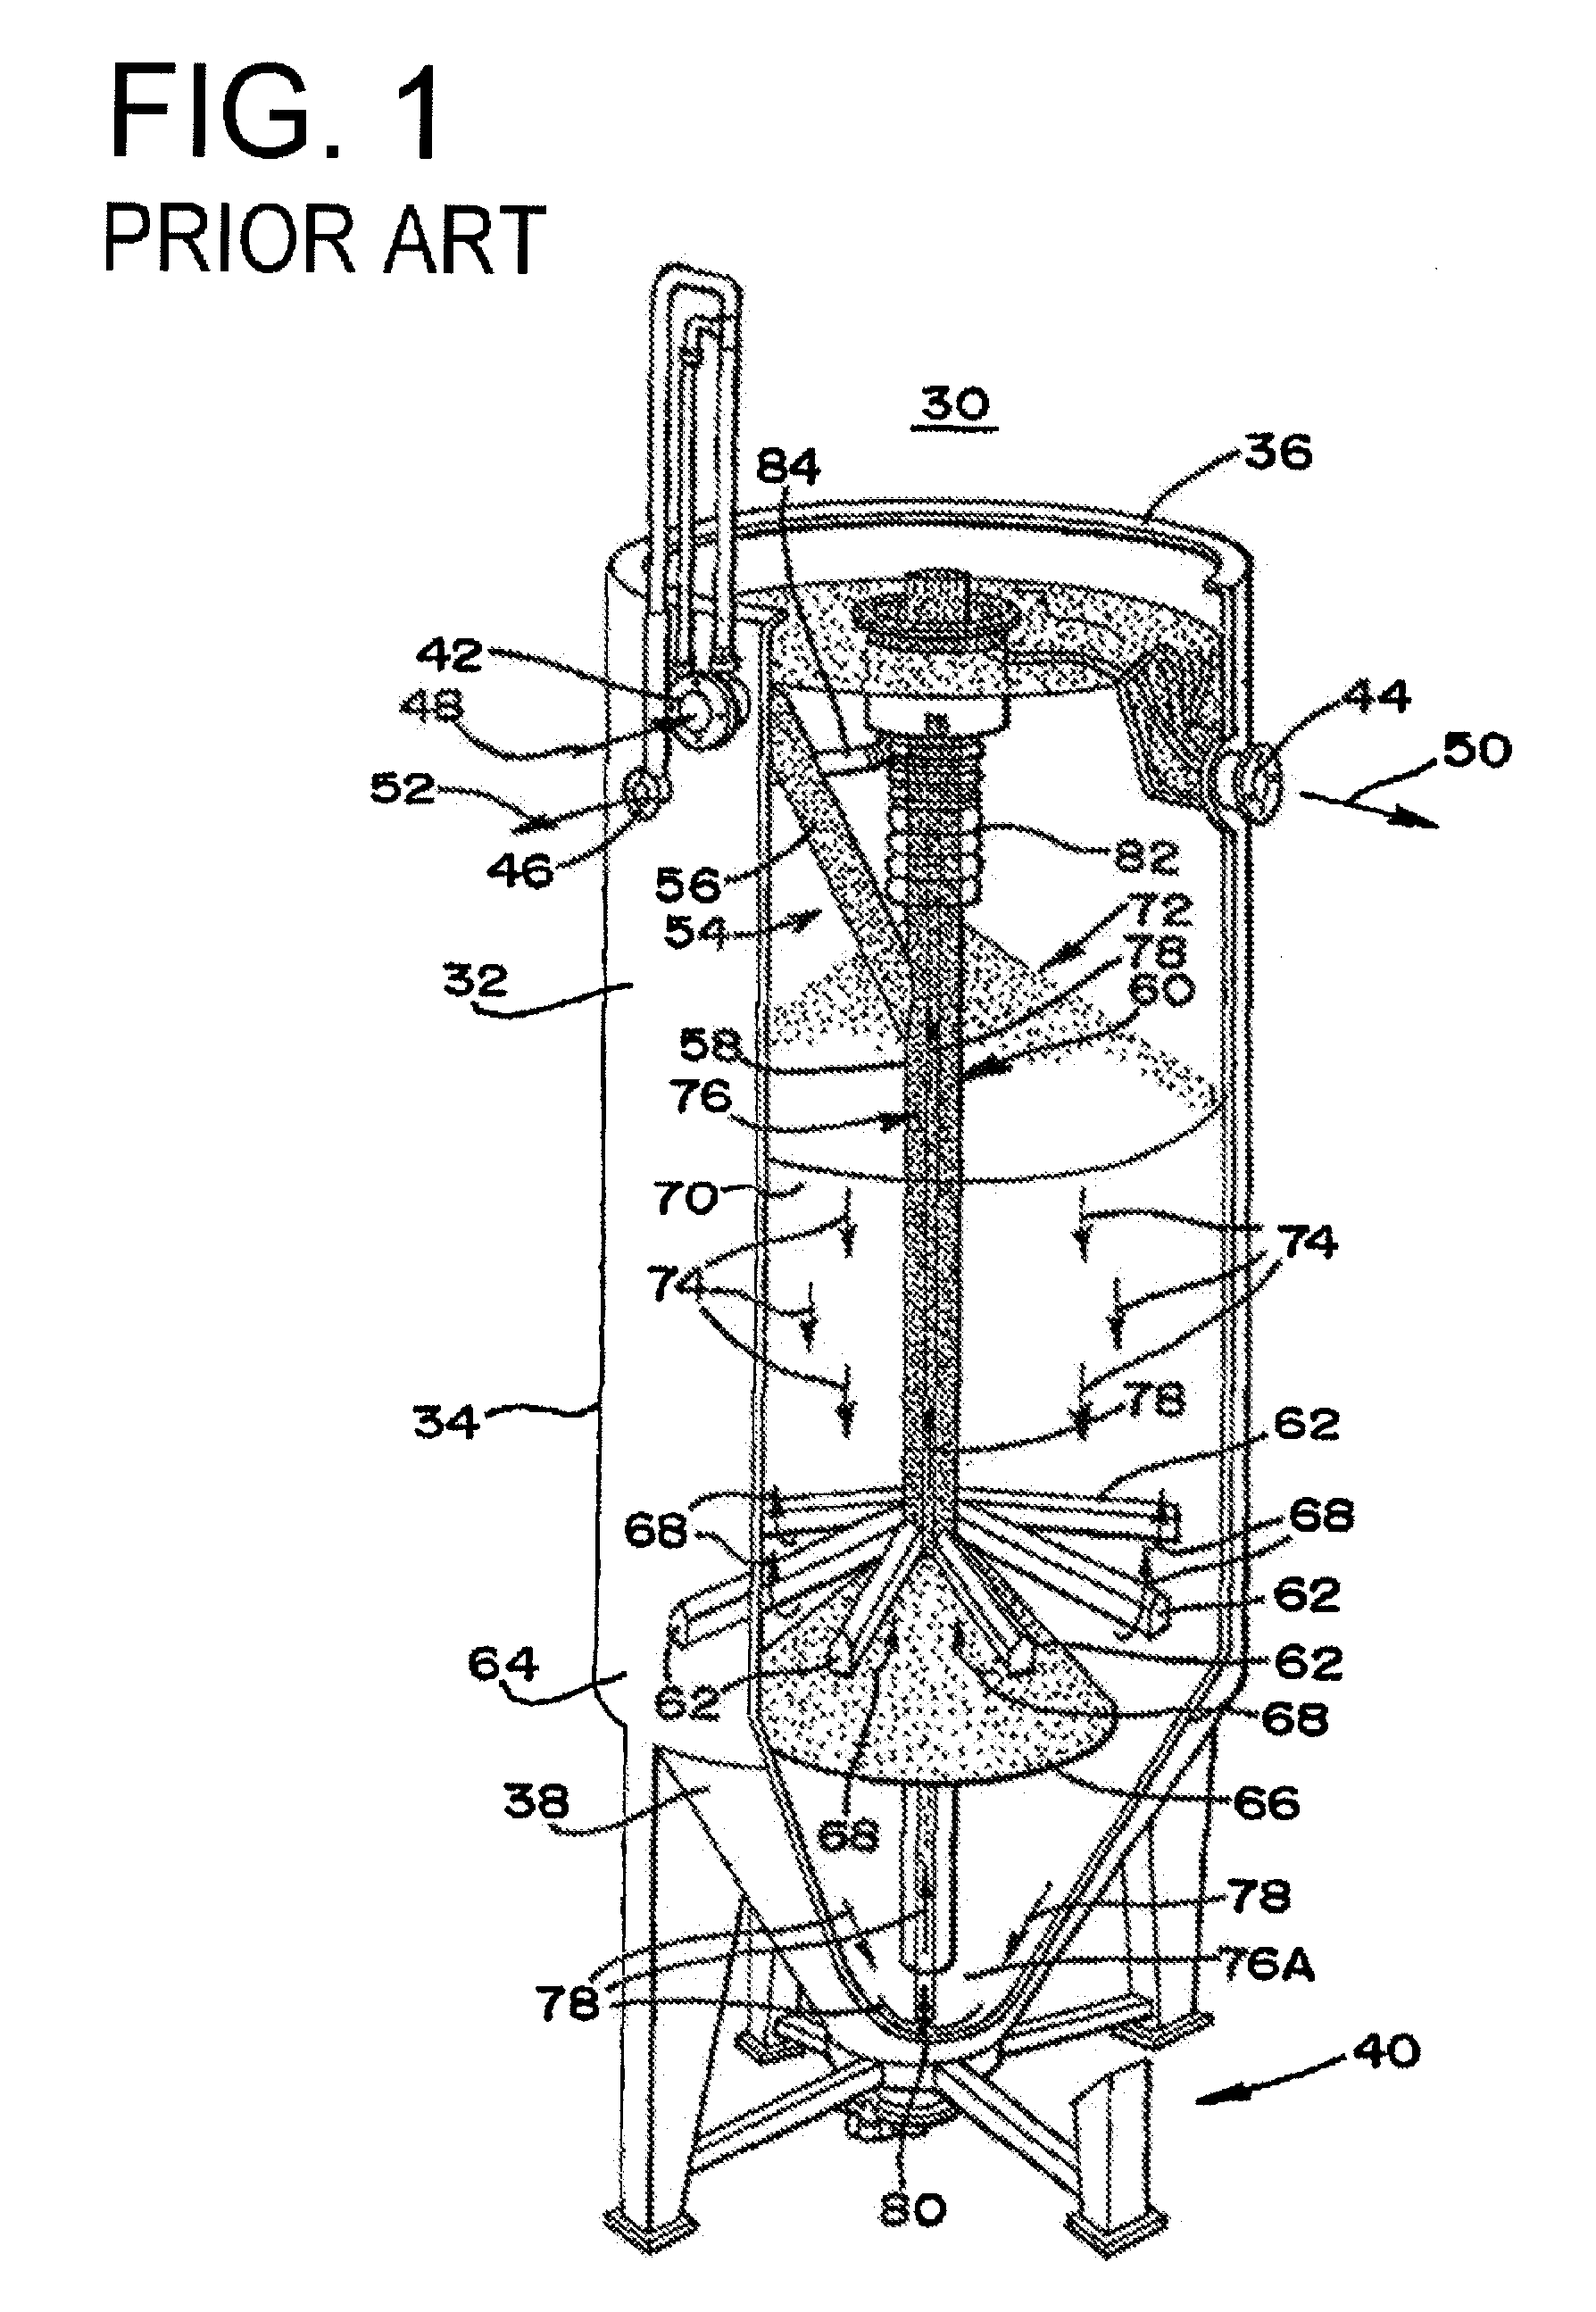 Method and apparatus for removing impurities in rejects from sequential filters using separate treatment units